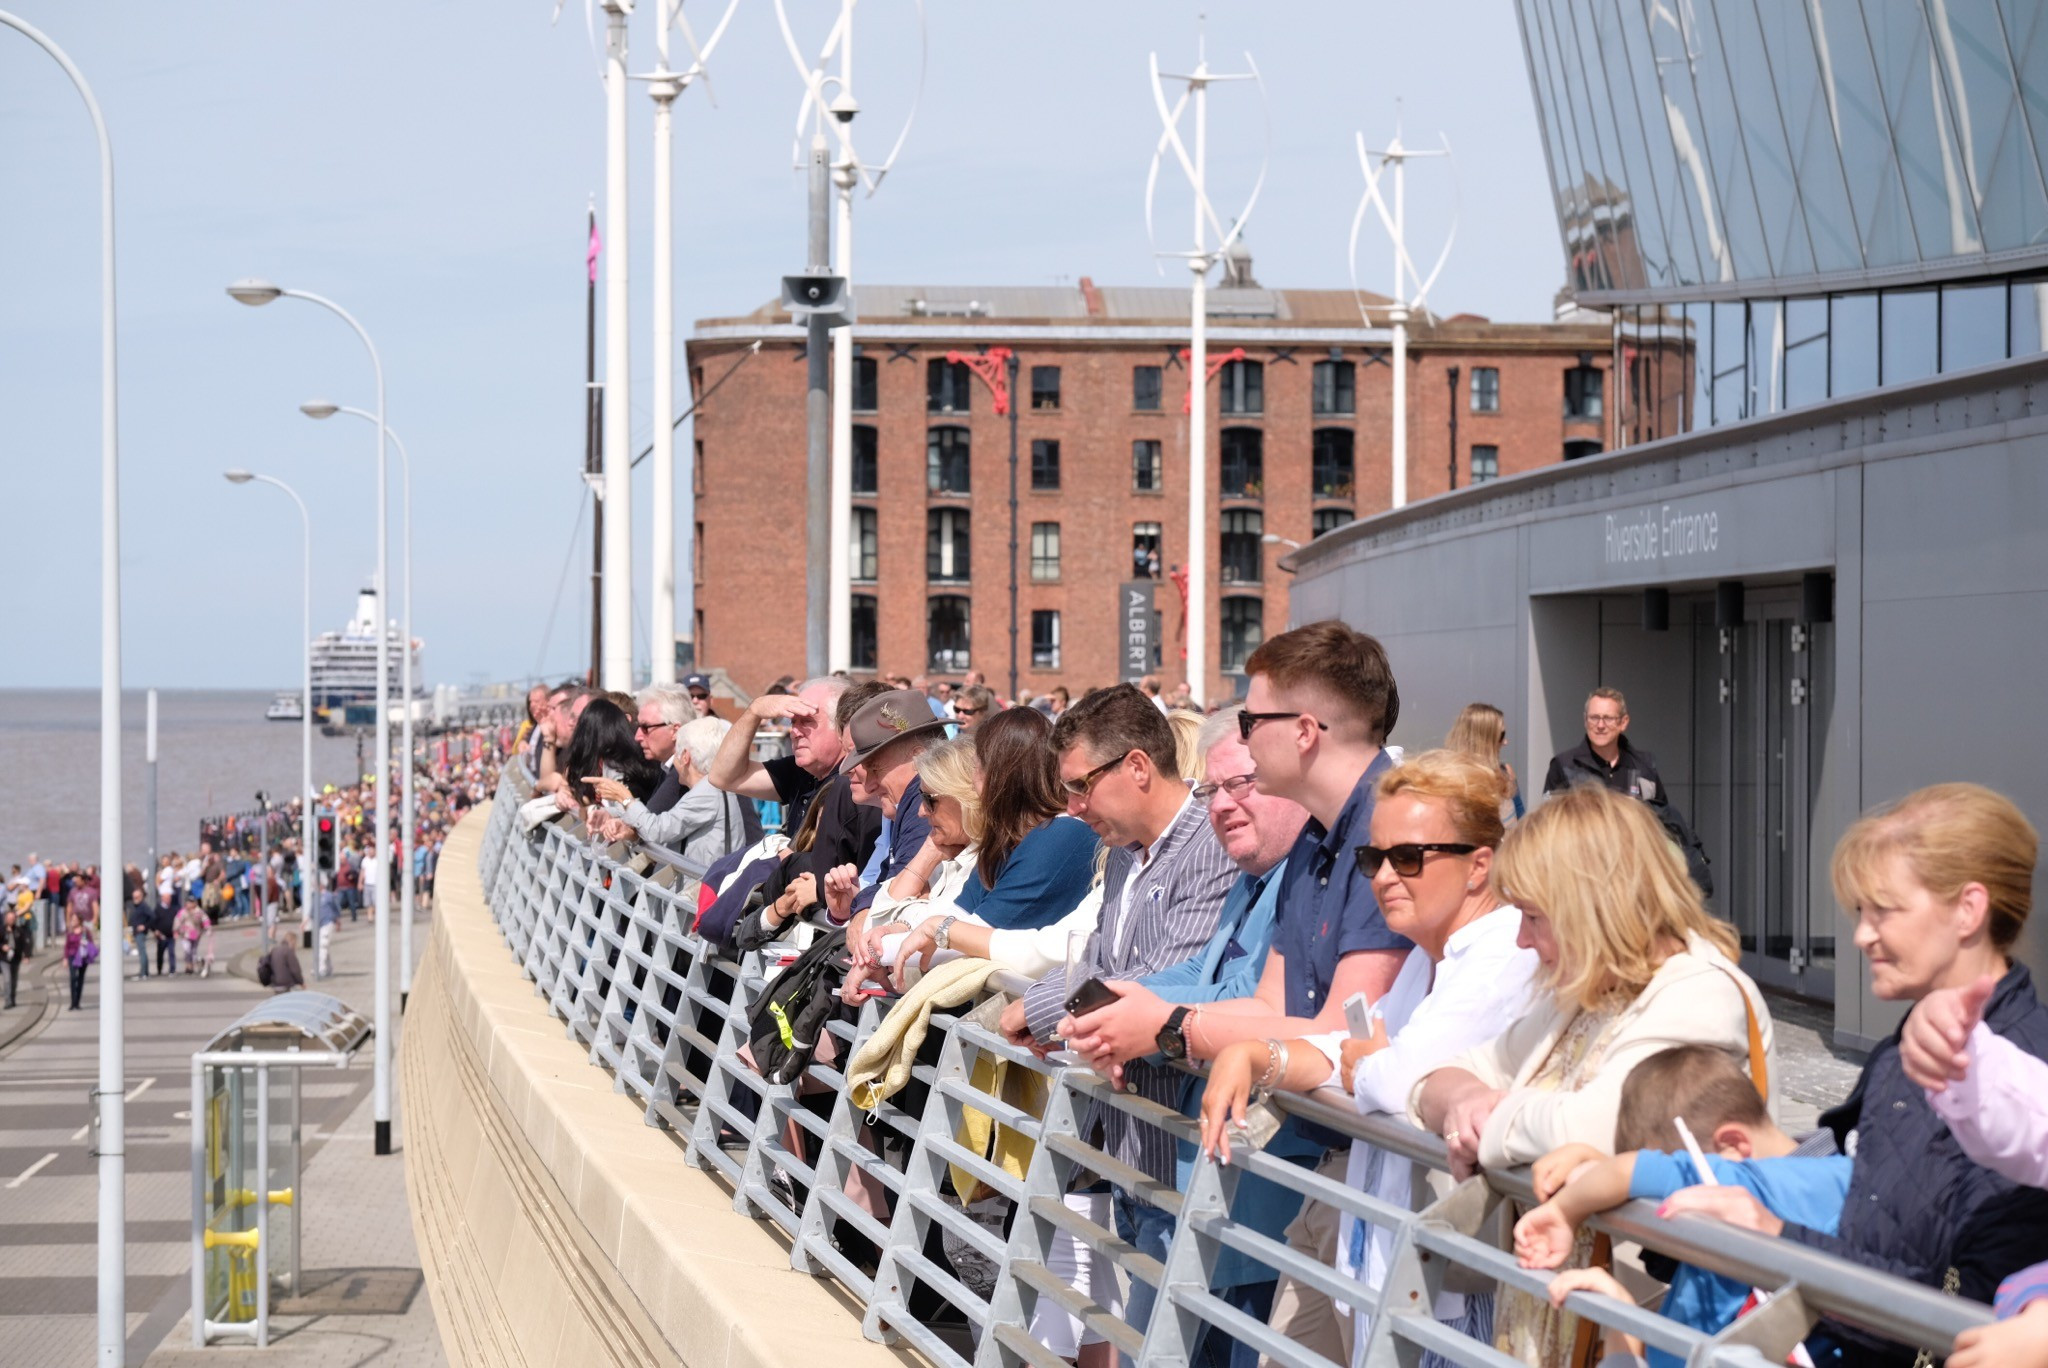 Thousands lined the docks in Liverpool to watch the 12 vessels in the Clipper Round the World Yacht Race set out on their 11-month voyage around the globe from the River Mersey ©Liverpool 2022